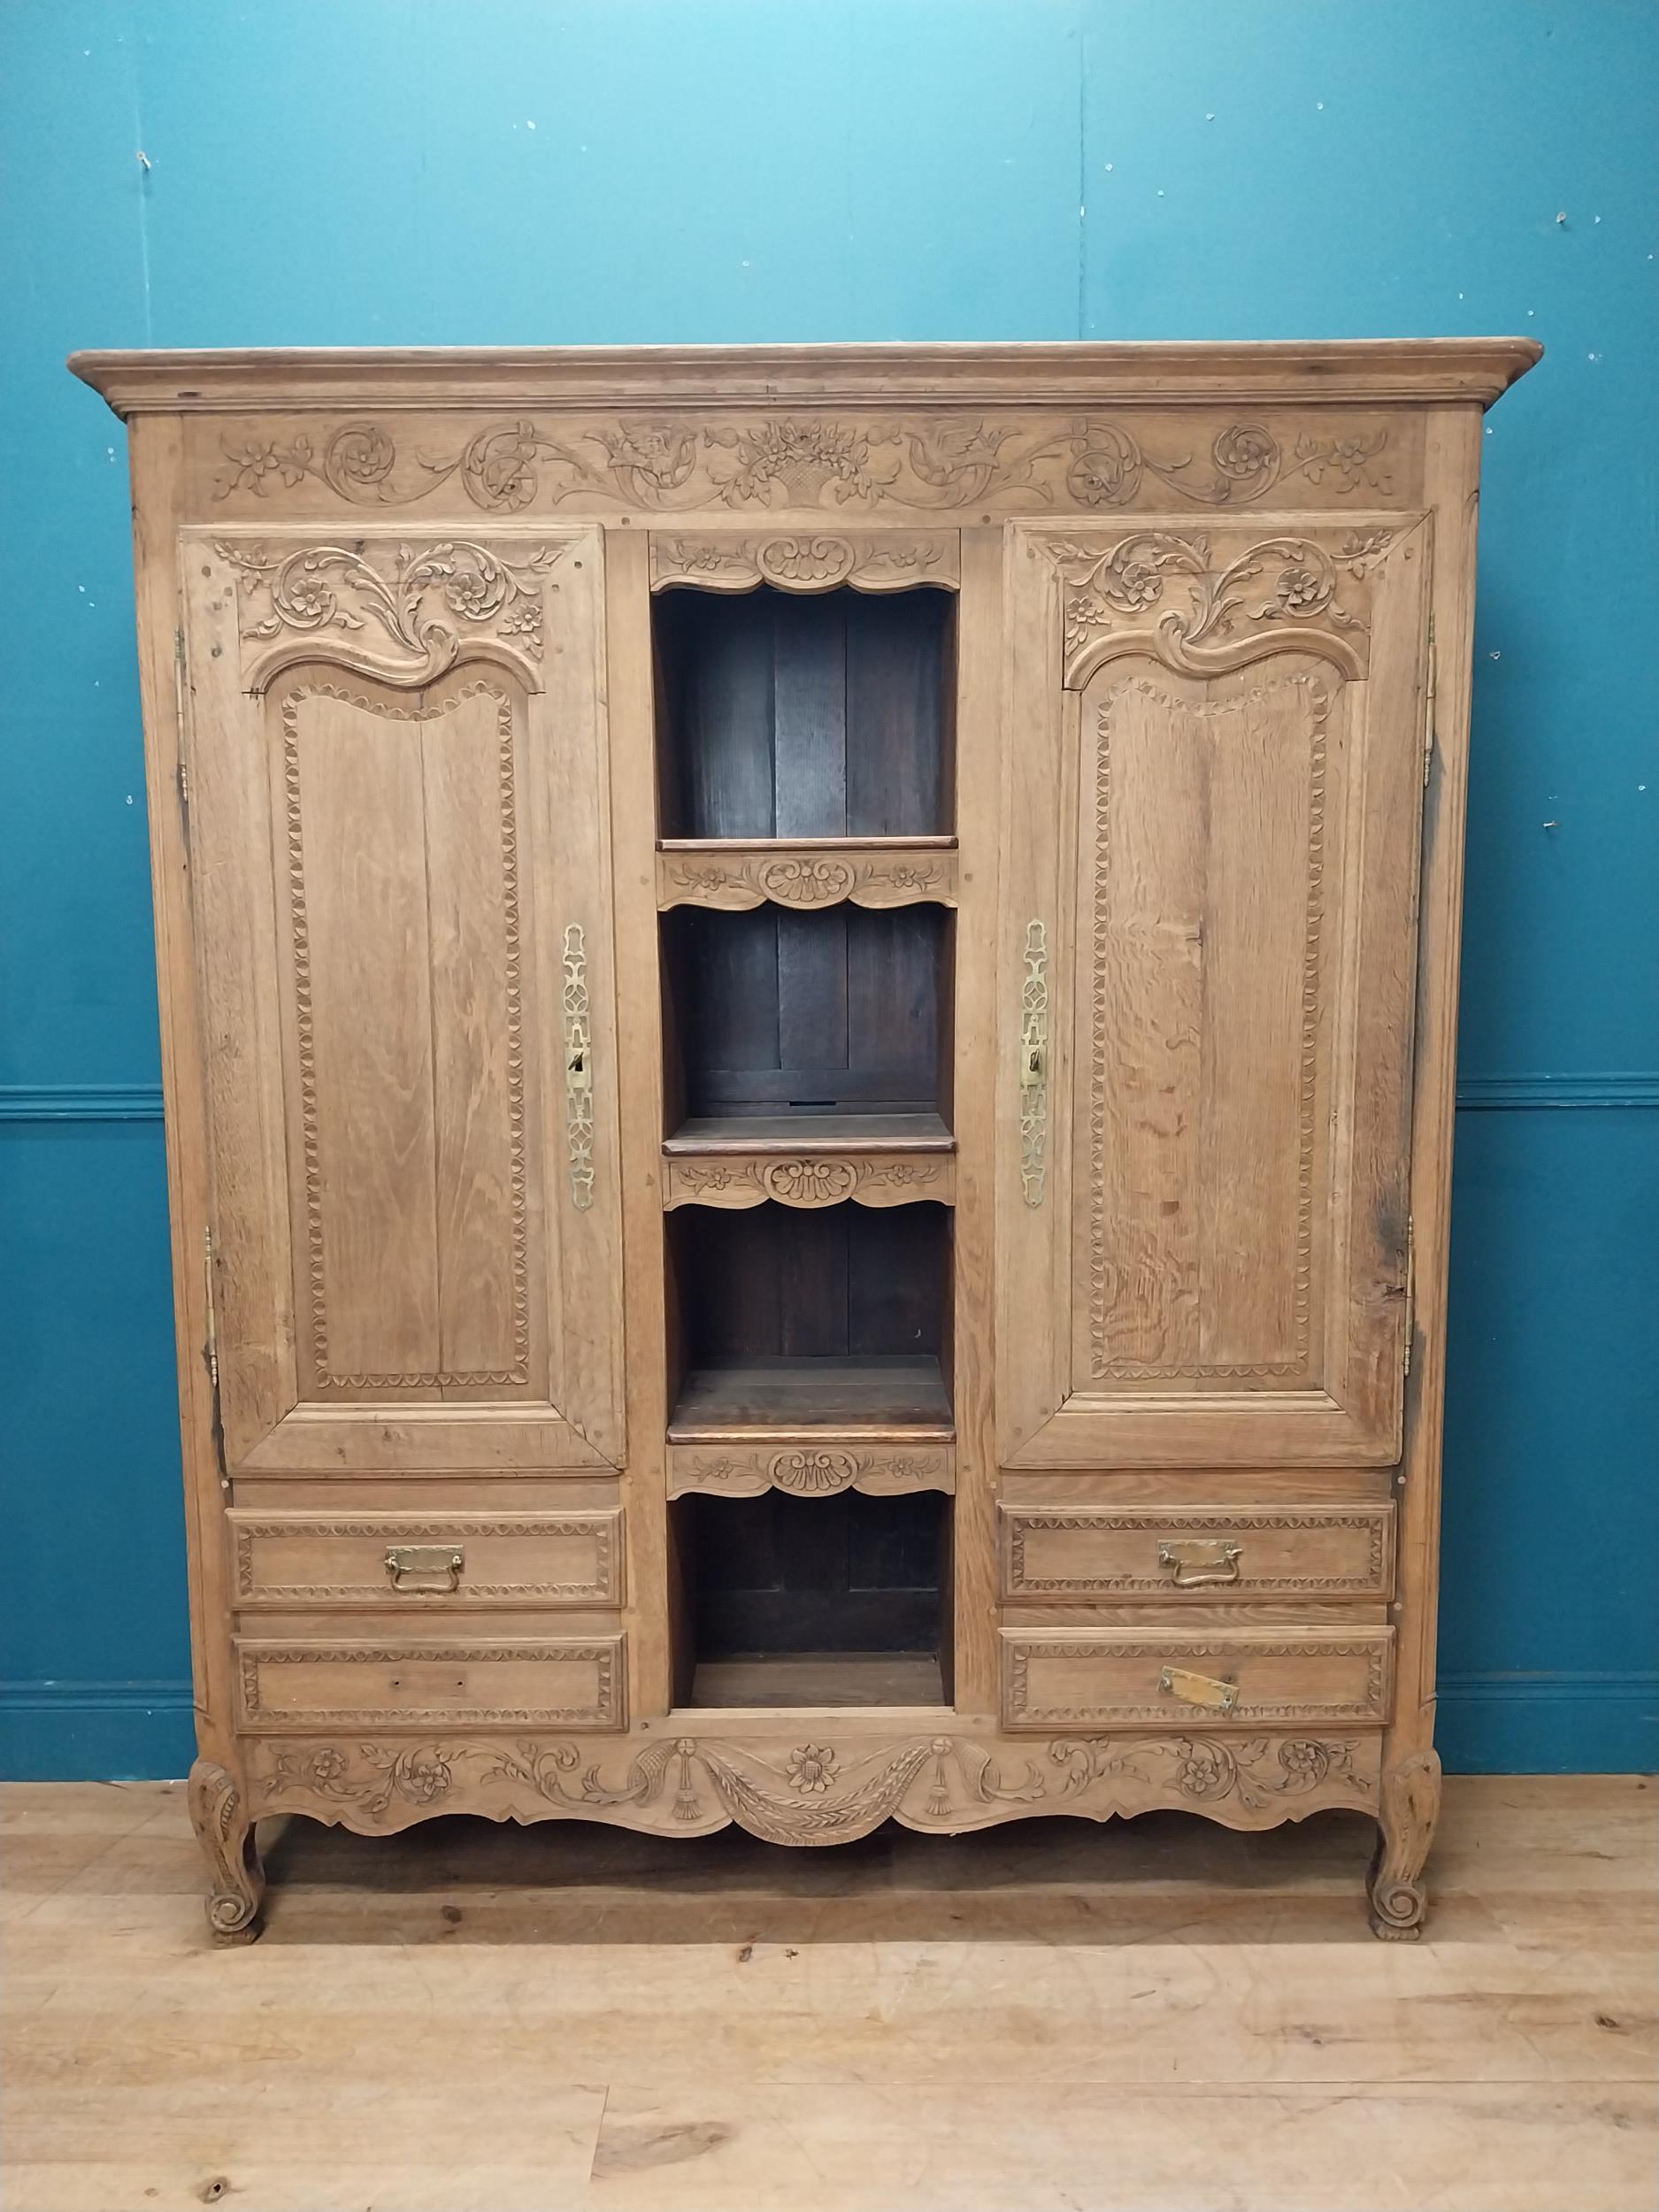 19th C. bleached oak kitchen cabinet with four open shelves in middle surrounded by two short